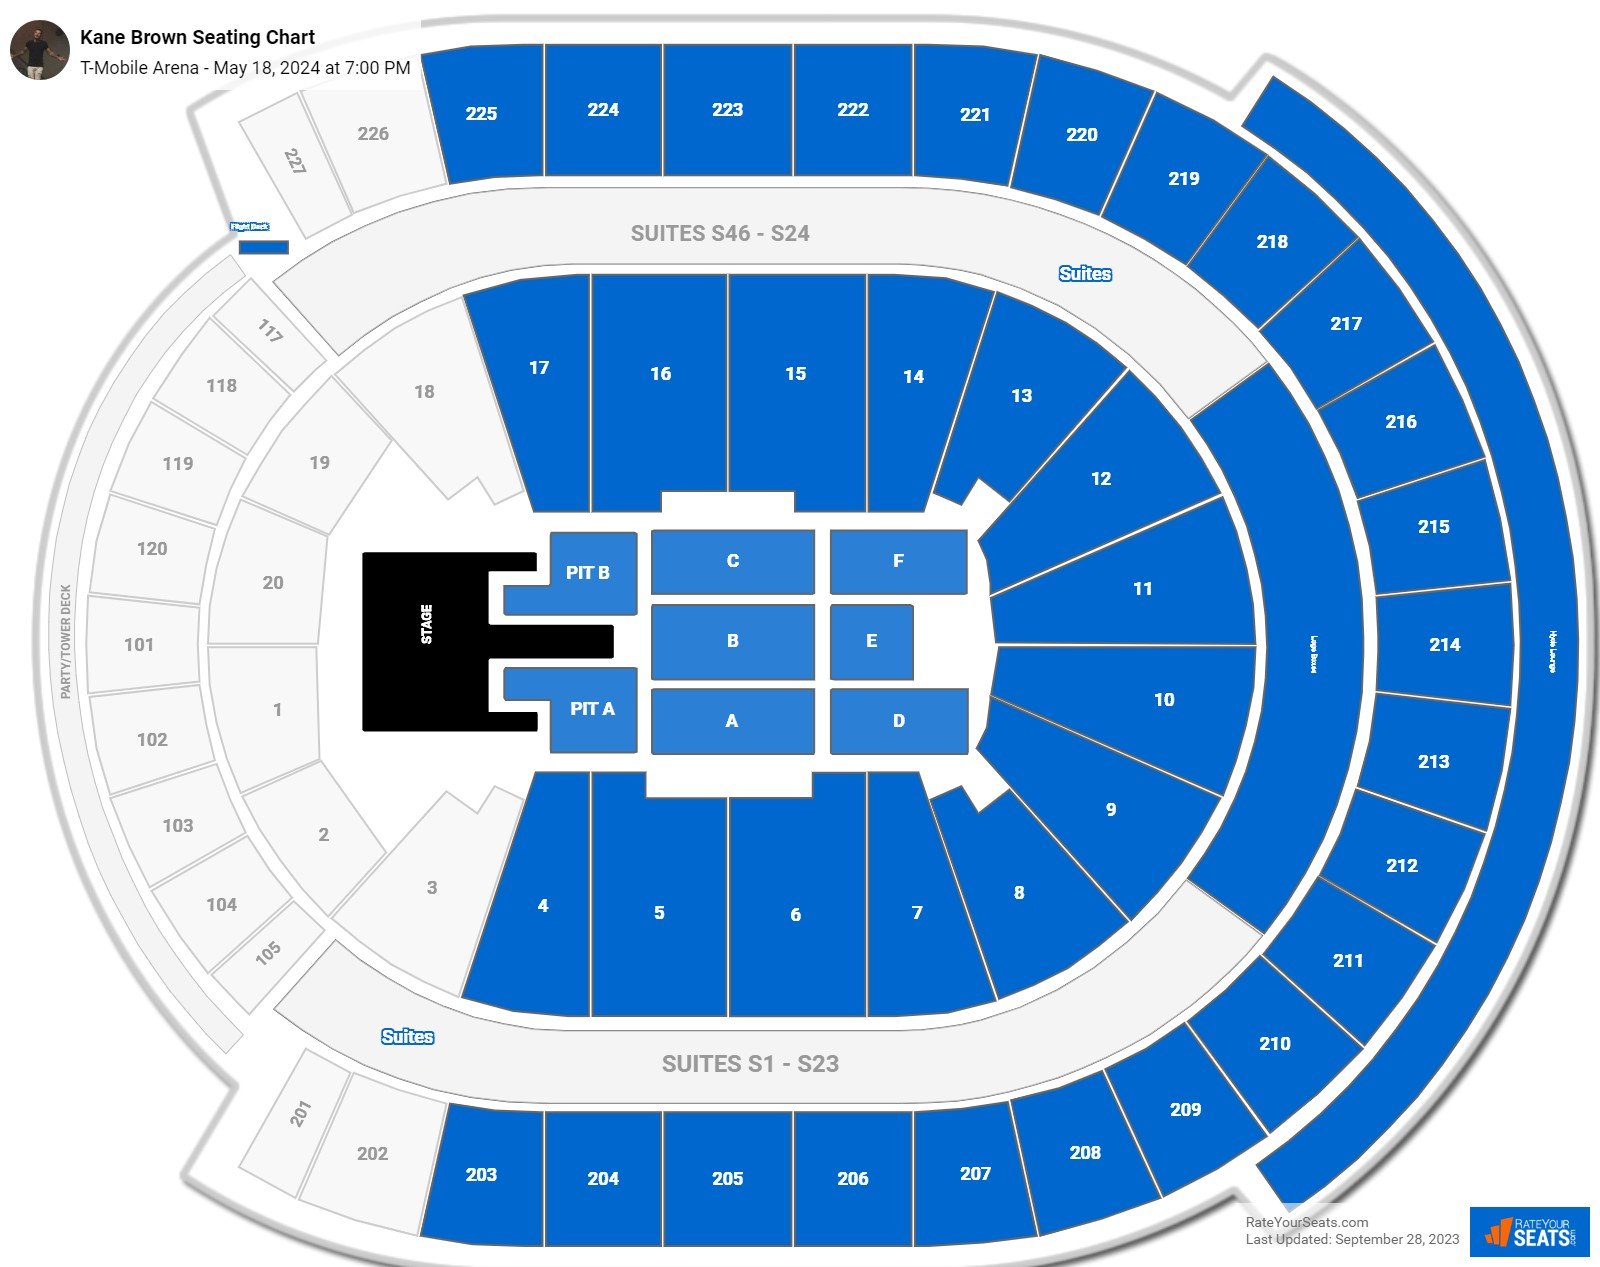 T-Mobile Arena Concert Seating Chart - RateYourSeats.com